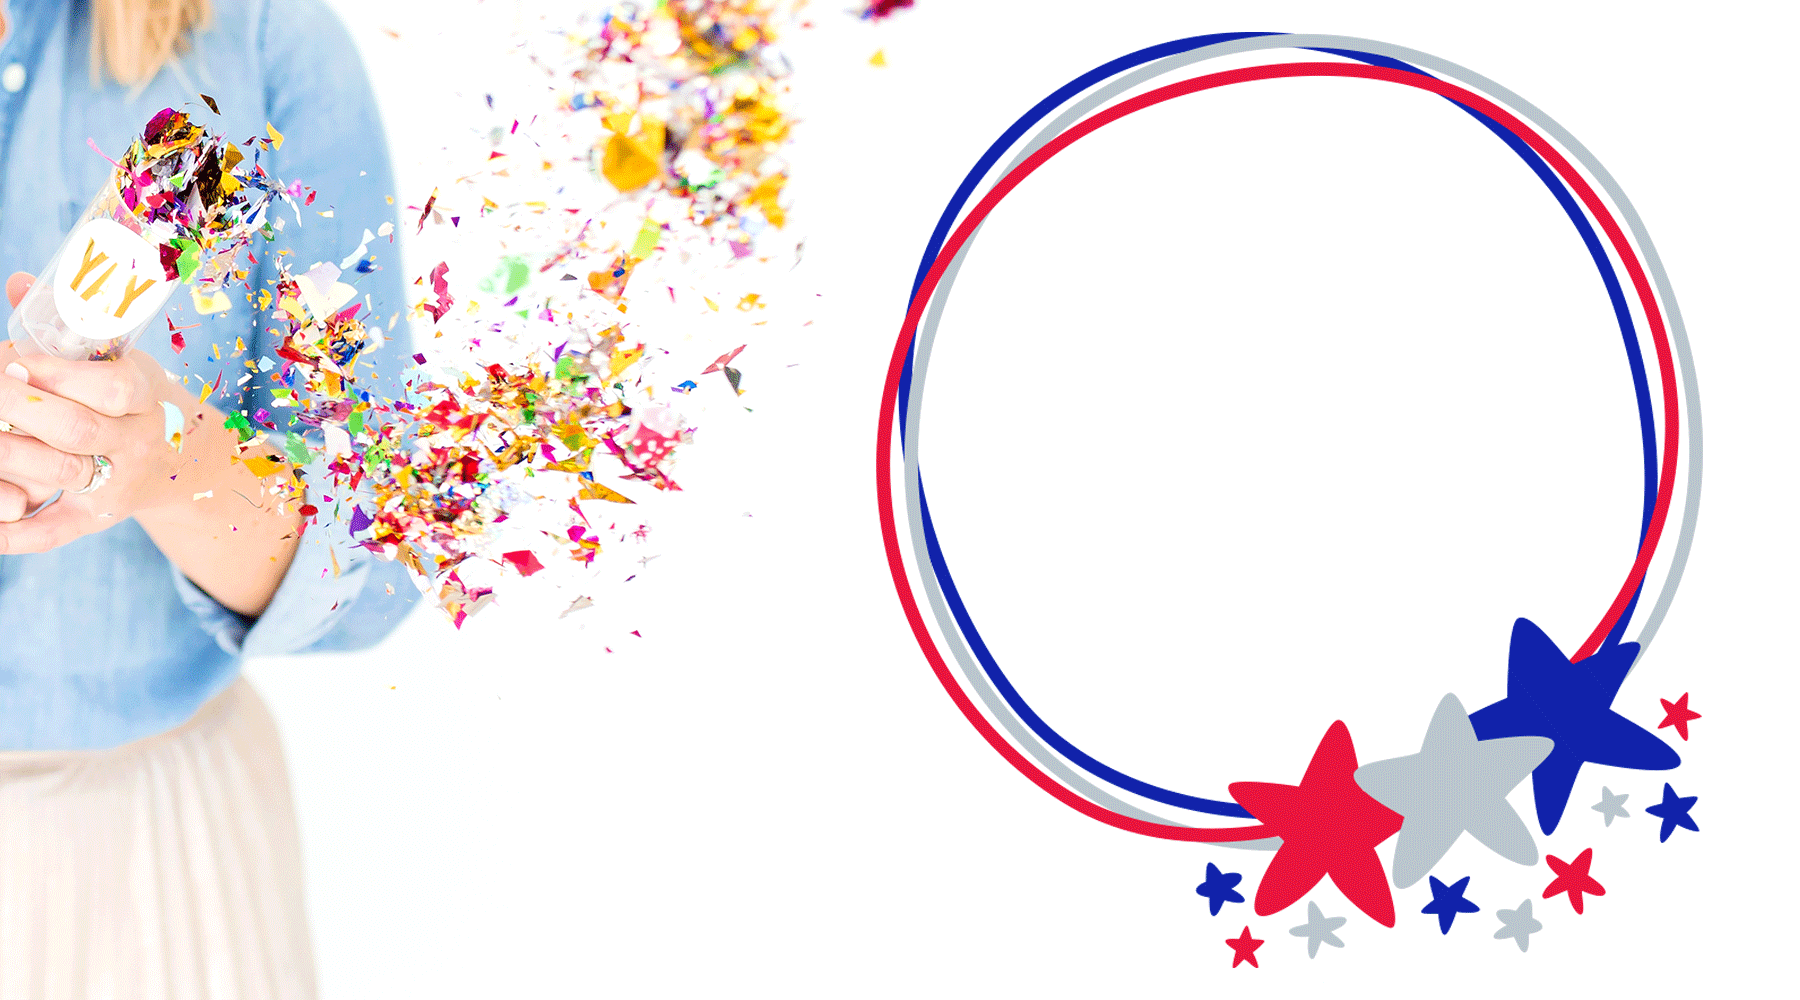 Doodle Star Frame for 4th of July SVG DXF EPS PNG Cut Files | Free for Personal Use